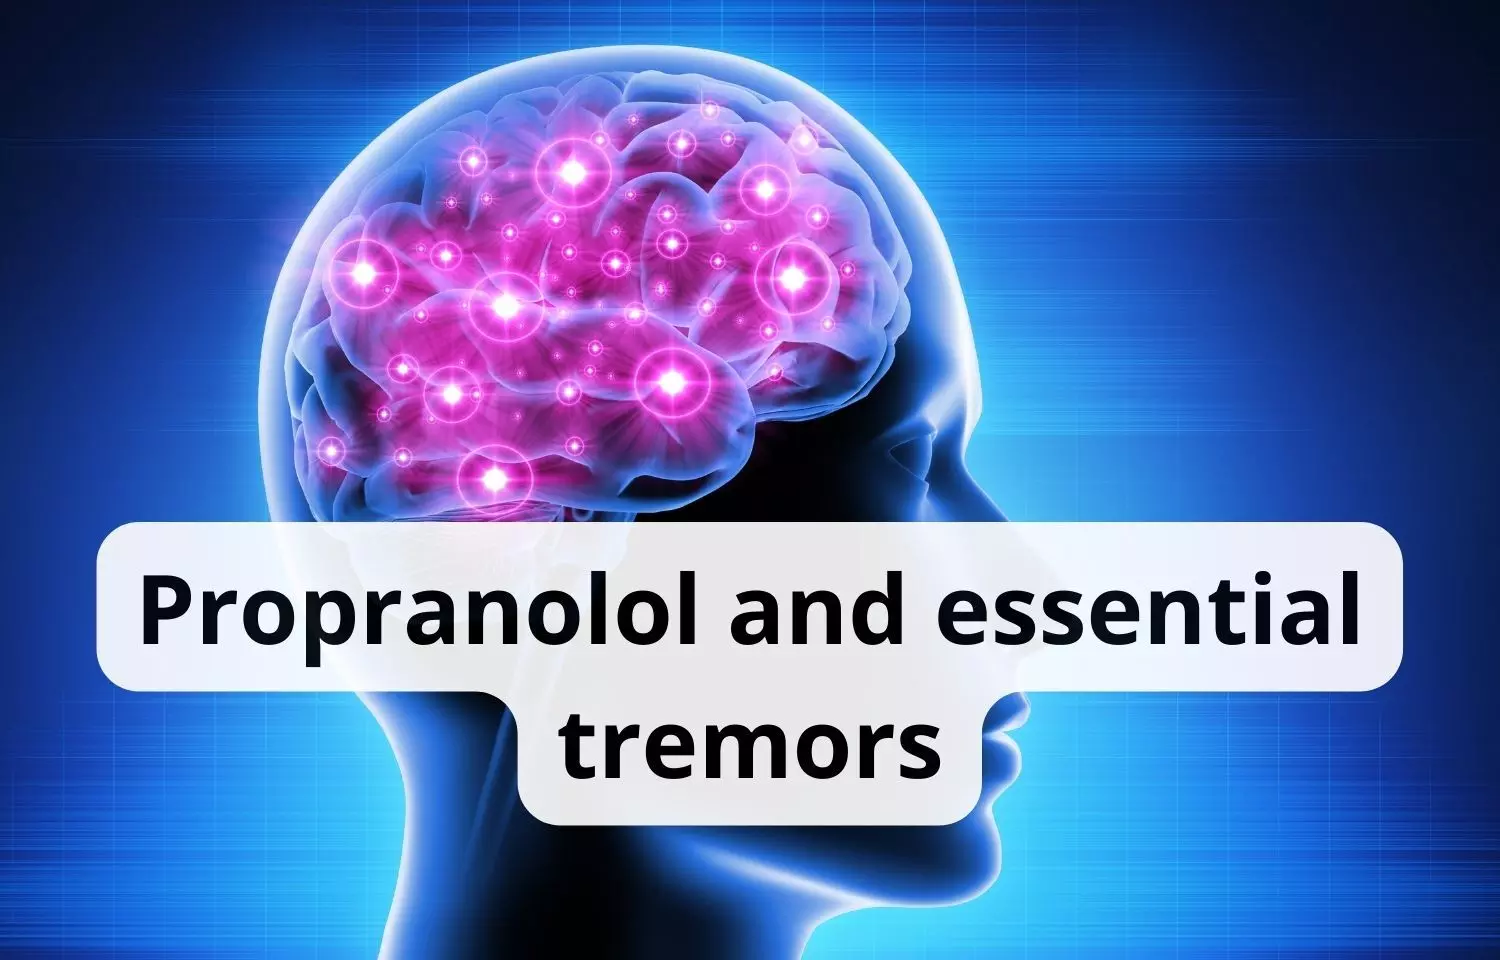 Propranolol and essential tremors: A critical review